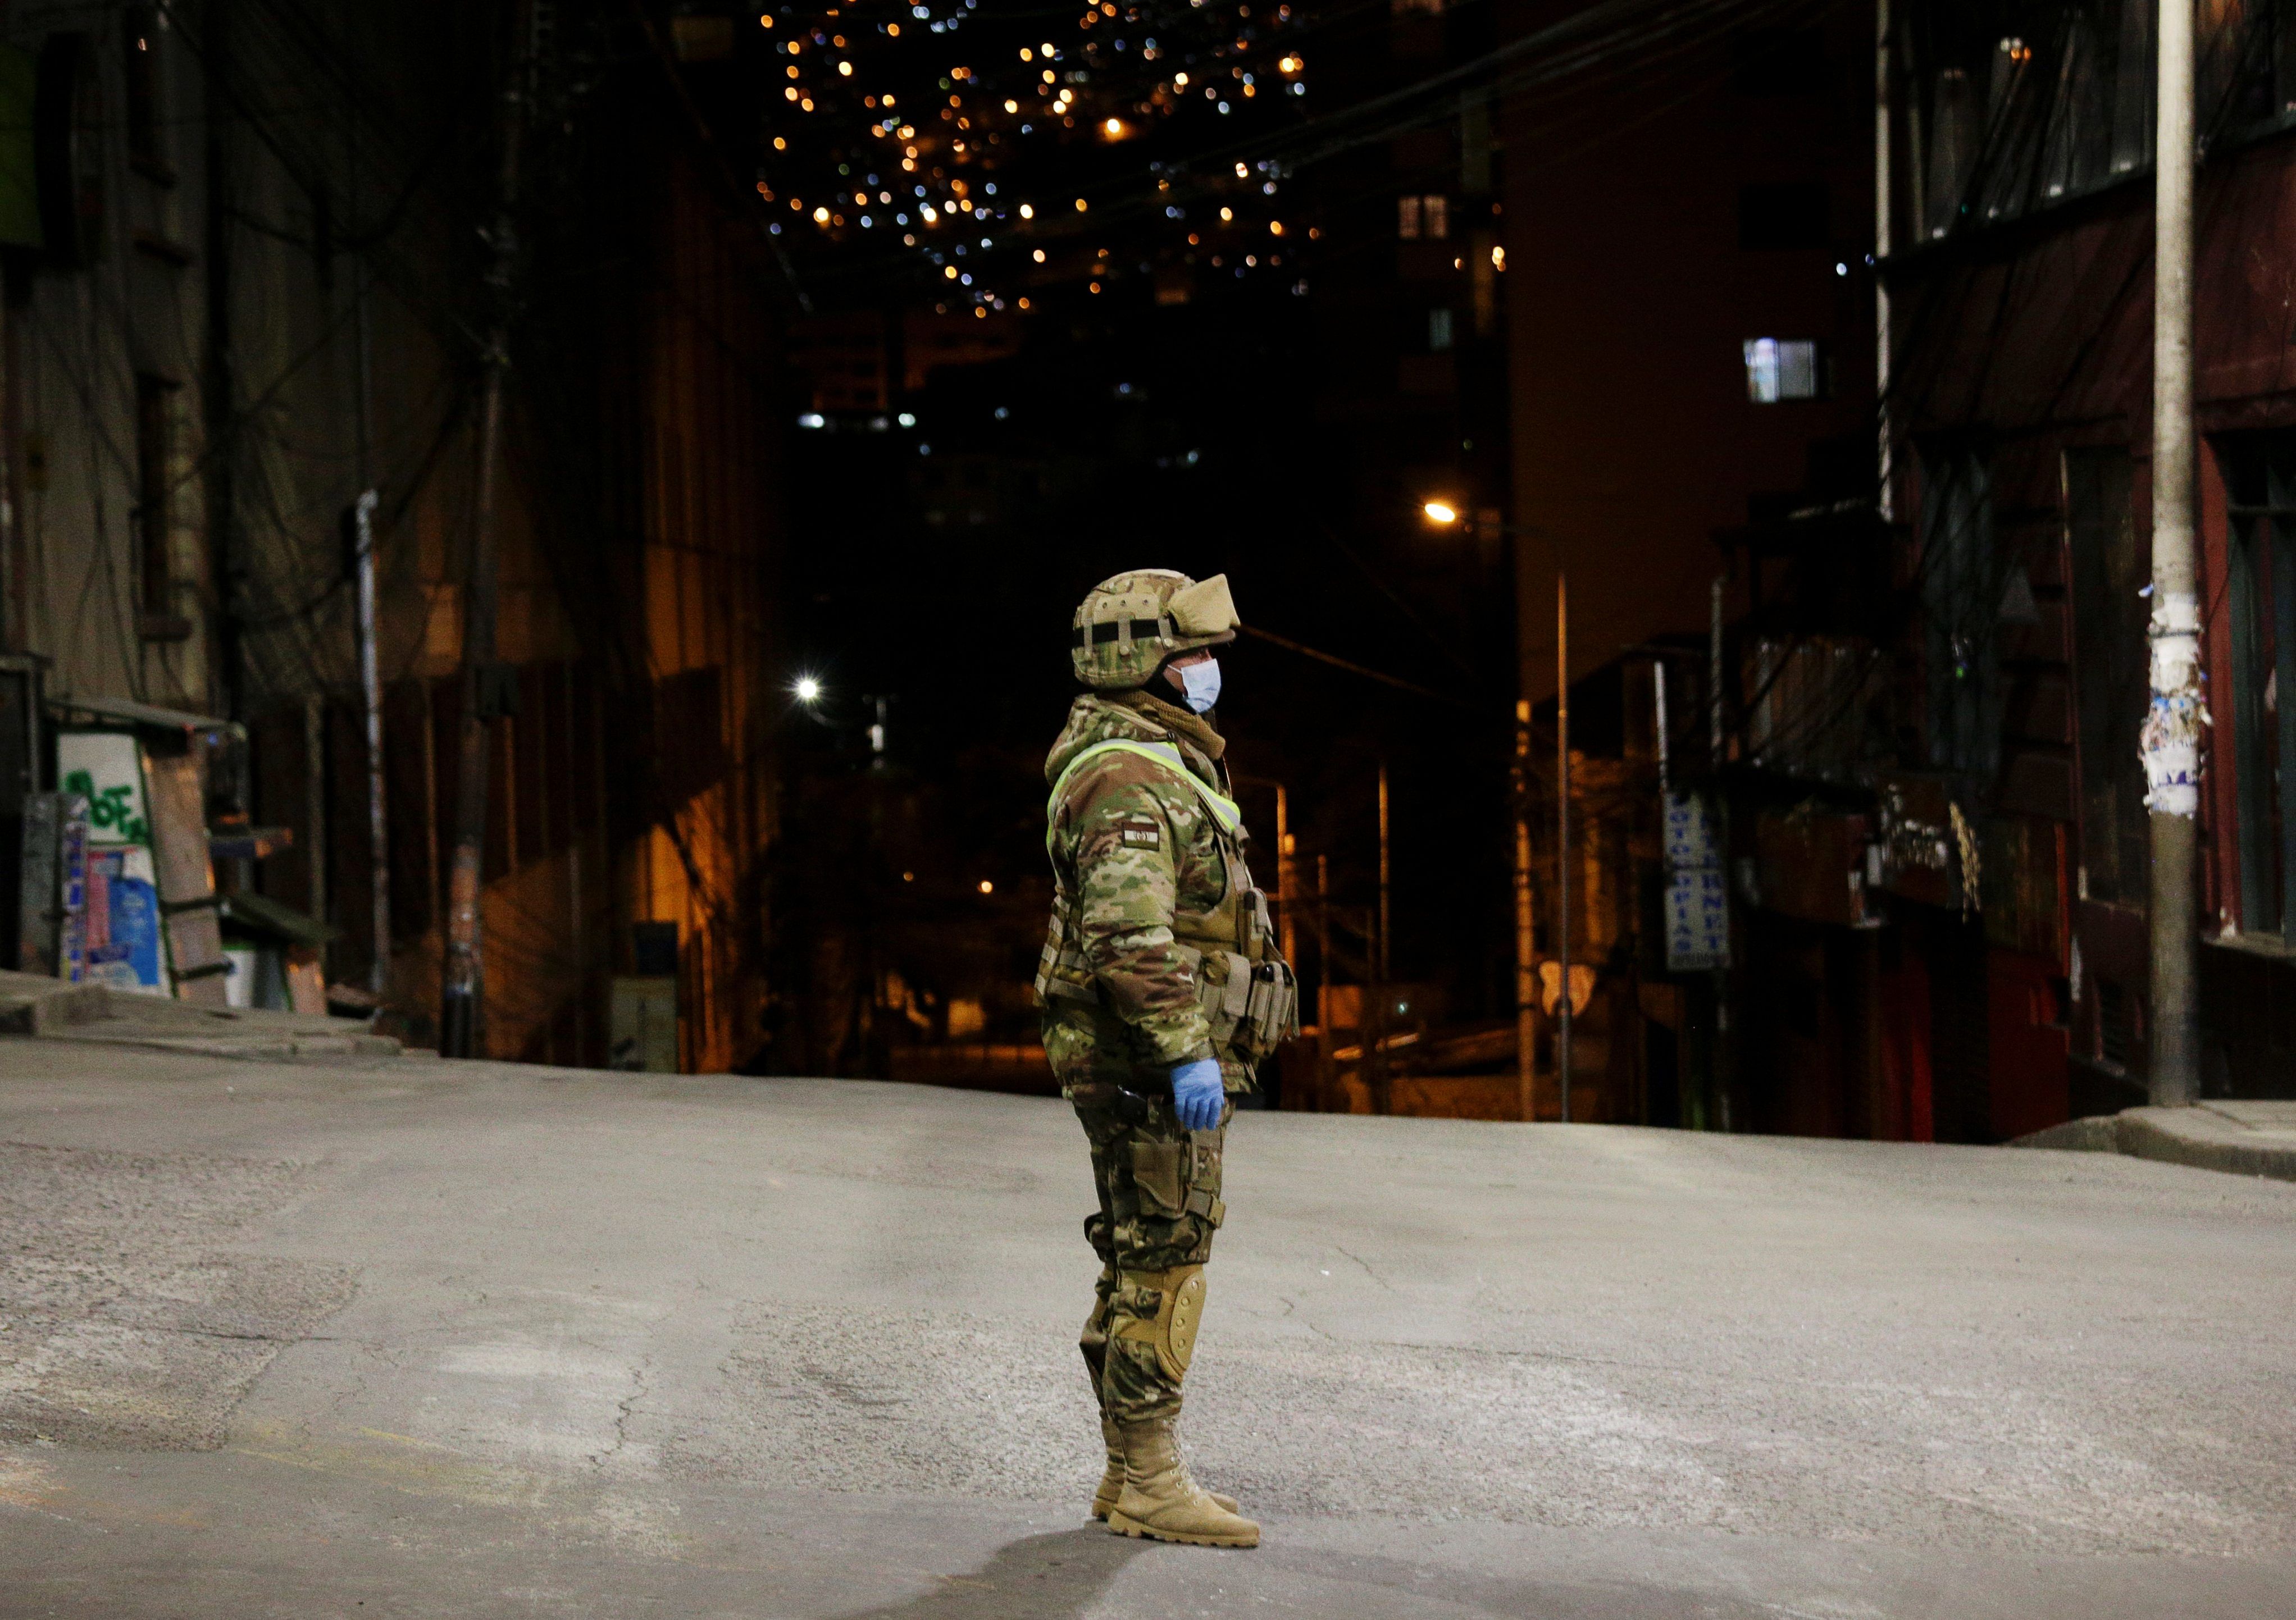 A Bolivian military officer stands on a street in the empty city centre of La Paz, after the government asked residents to stay indoors to prevent the spread of the coronavirus disease. (Credit: Reuters)